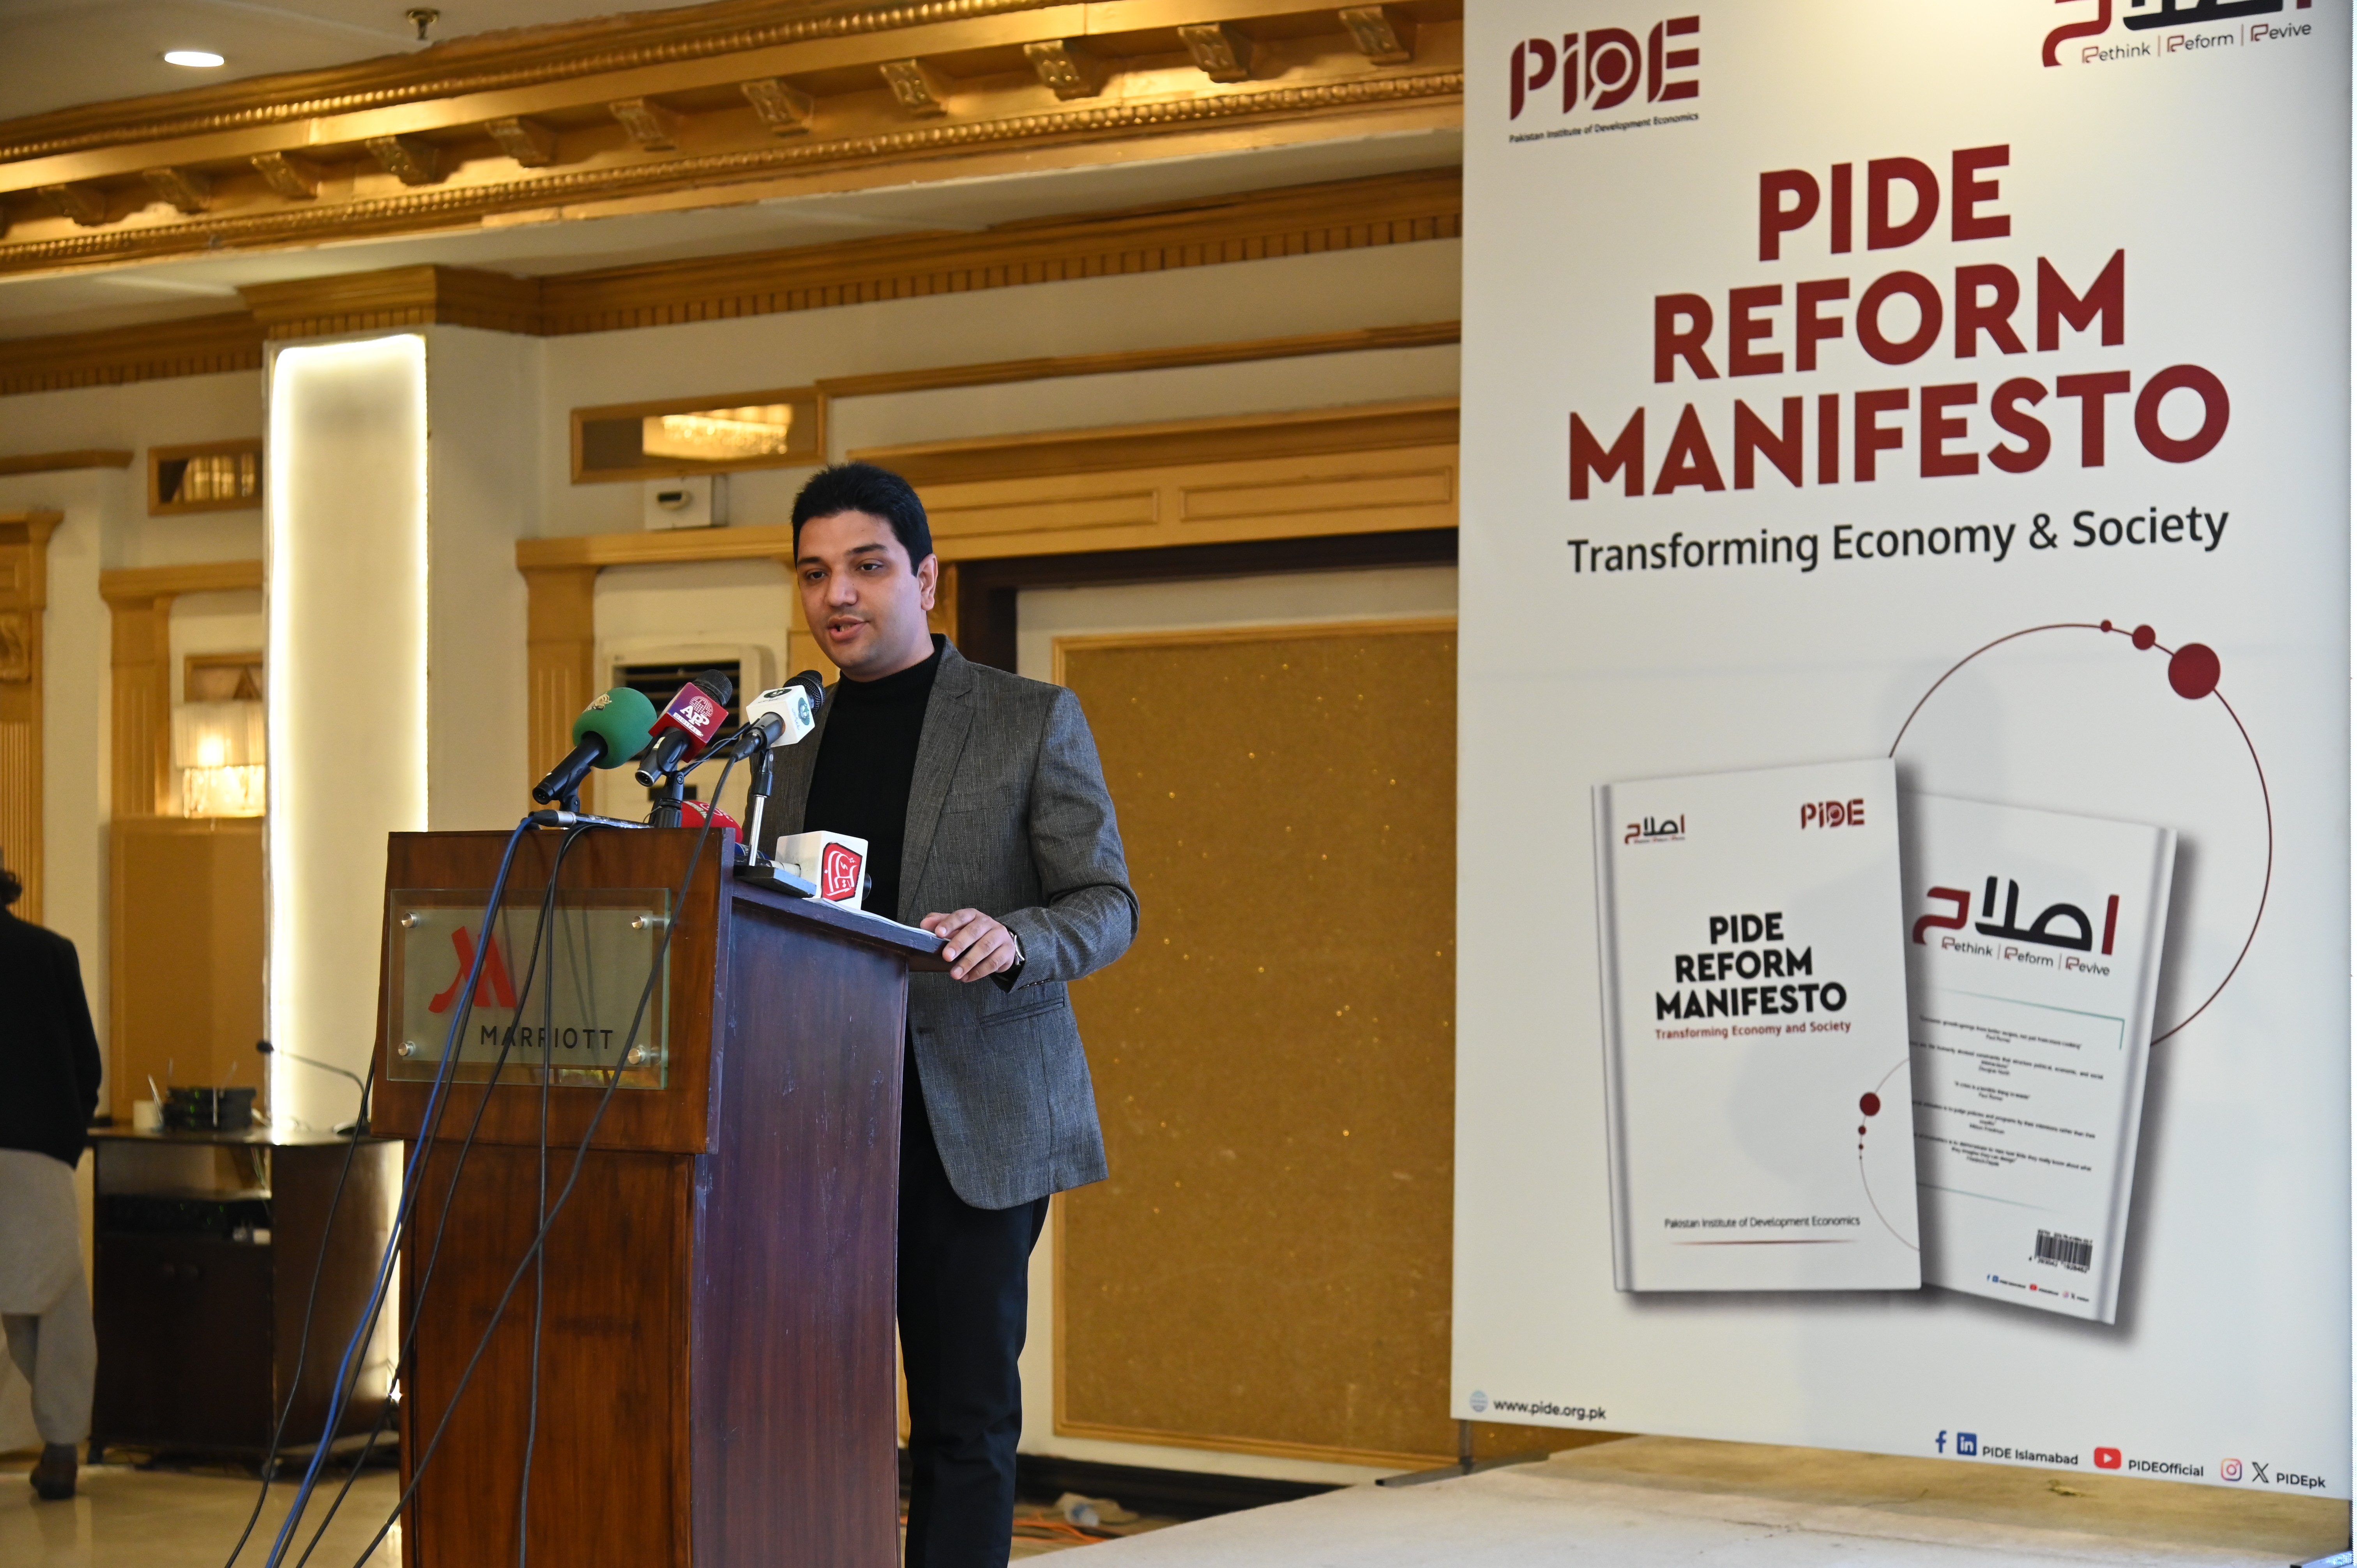 Saddam Hussein, Assistant Chief (Policy) at PIDE expressing his views on the reform manifesto